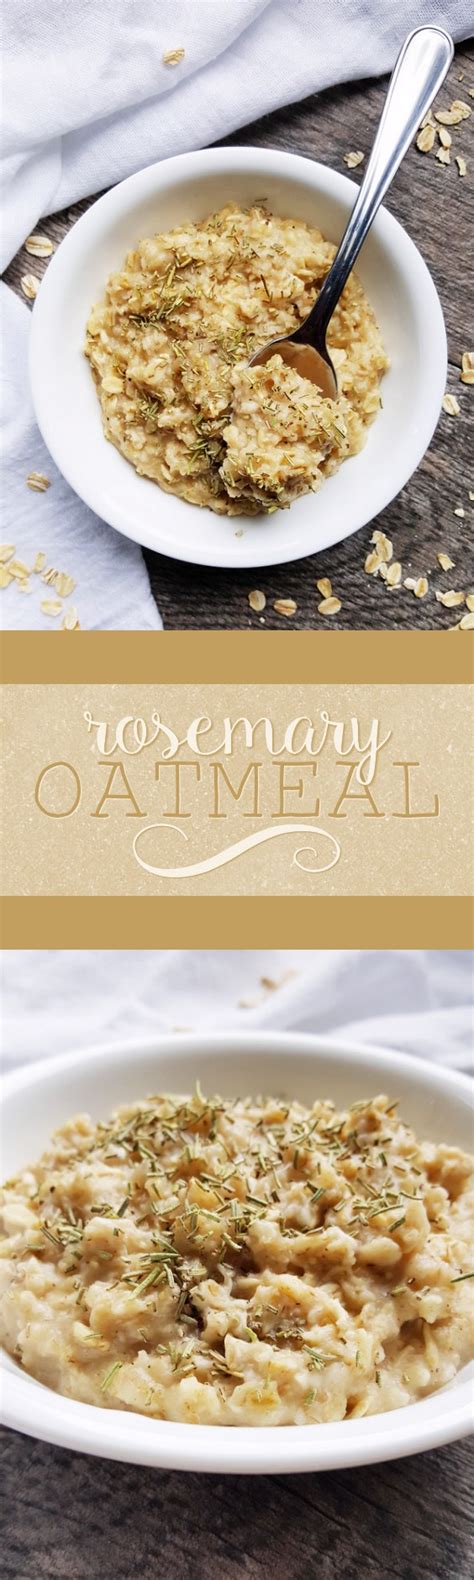 Calorie ideas for weight loss. Rosemary Oatmeal - Courtney's Cookbook | Low calorie ...